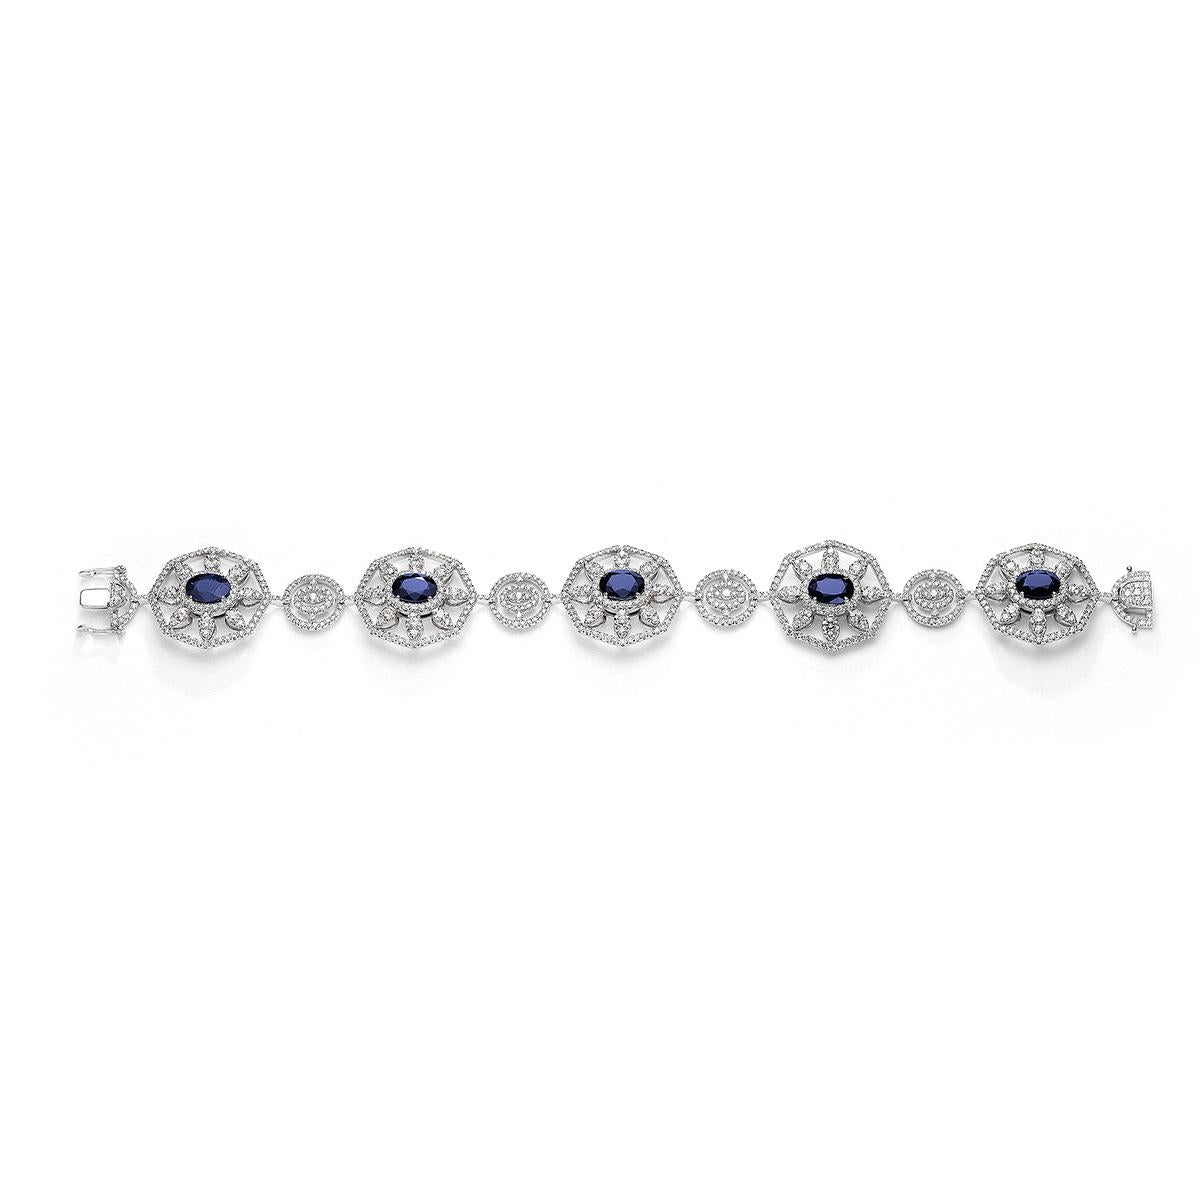 Bracelet in 18kt white gold set with 5 oval cut sapphires 7.37 cts and 661 diamonds 6.38 cts            